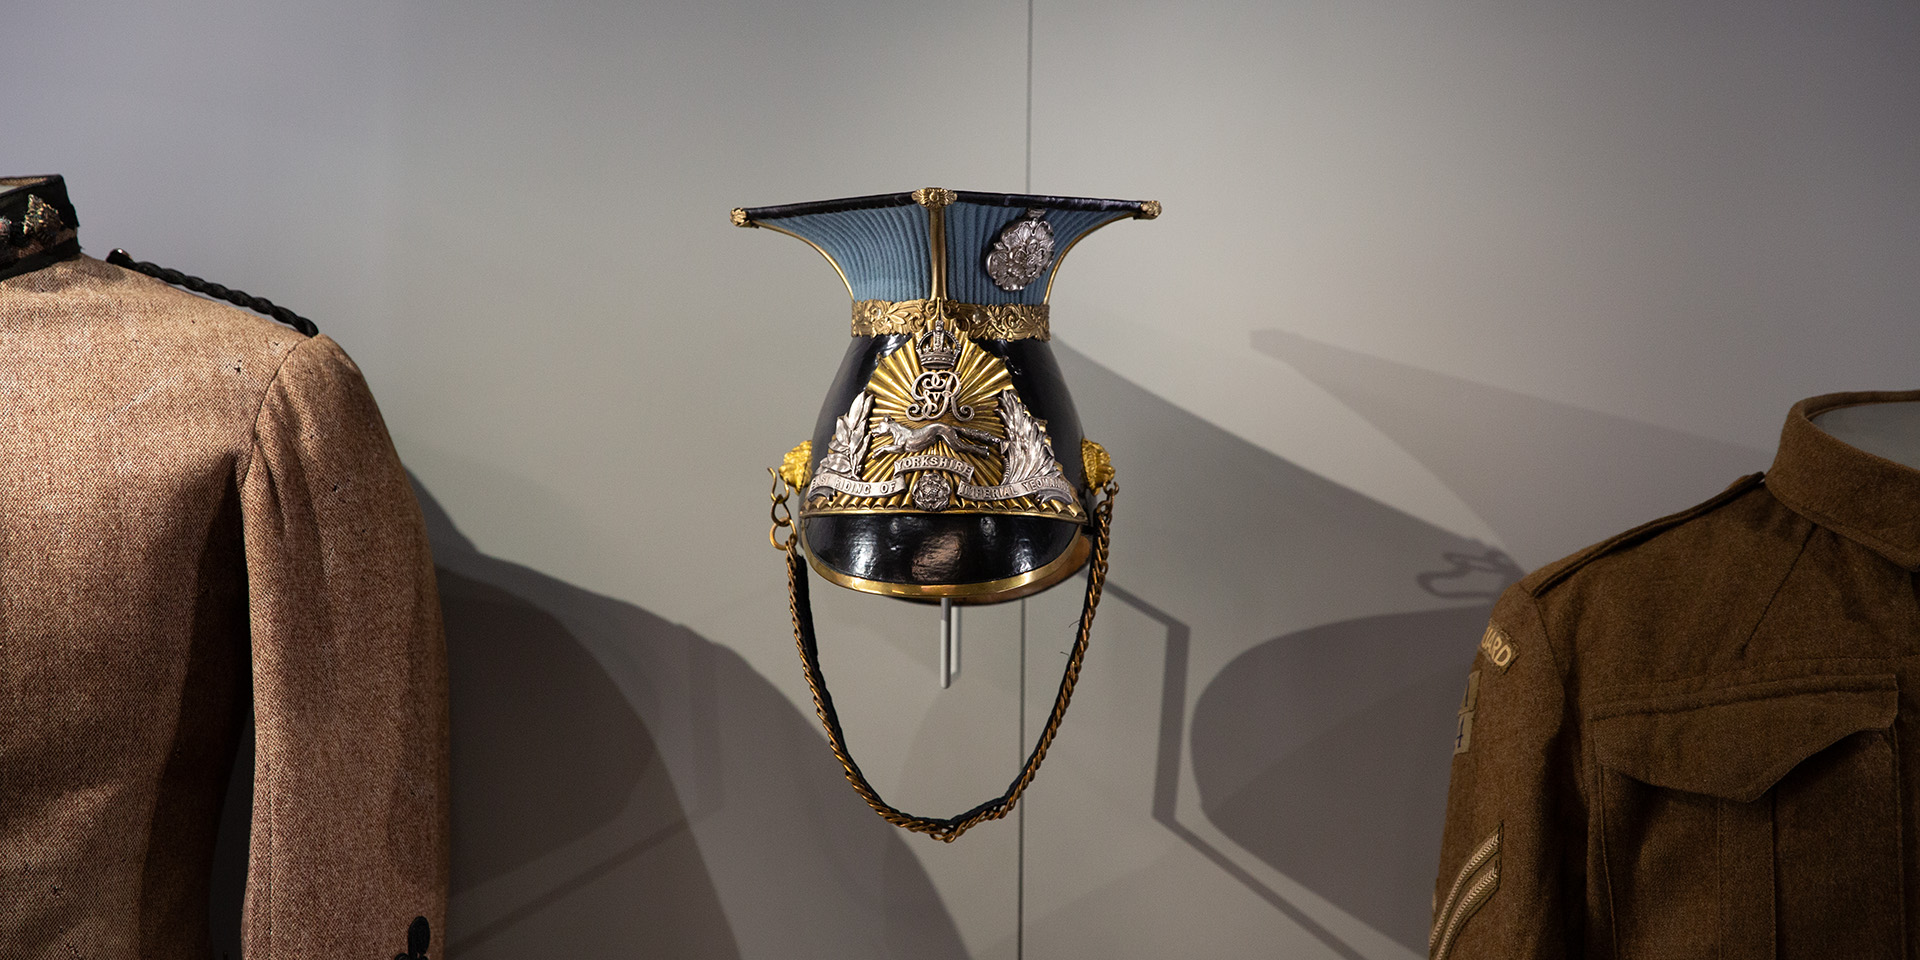 Helmet of the East Riding of Yorkshire Imperial Yeomanry